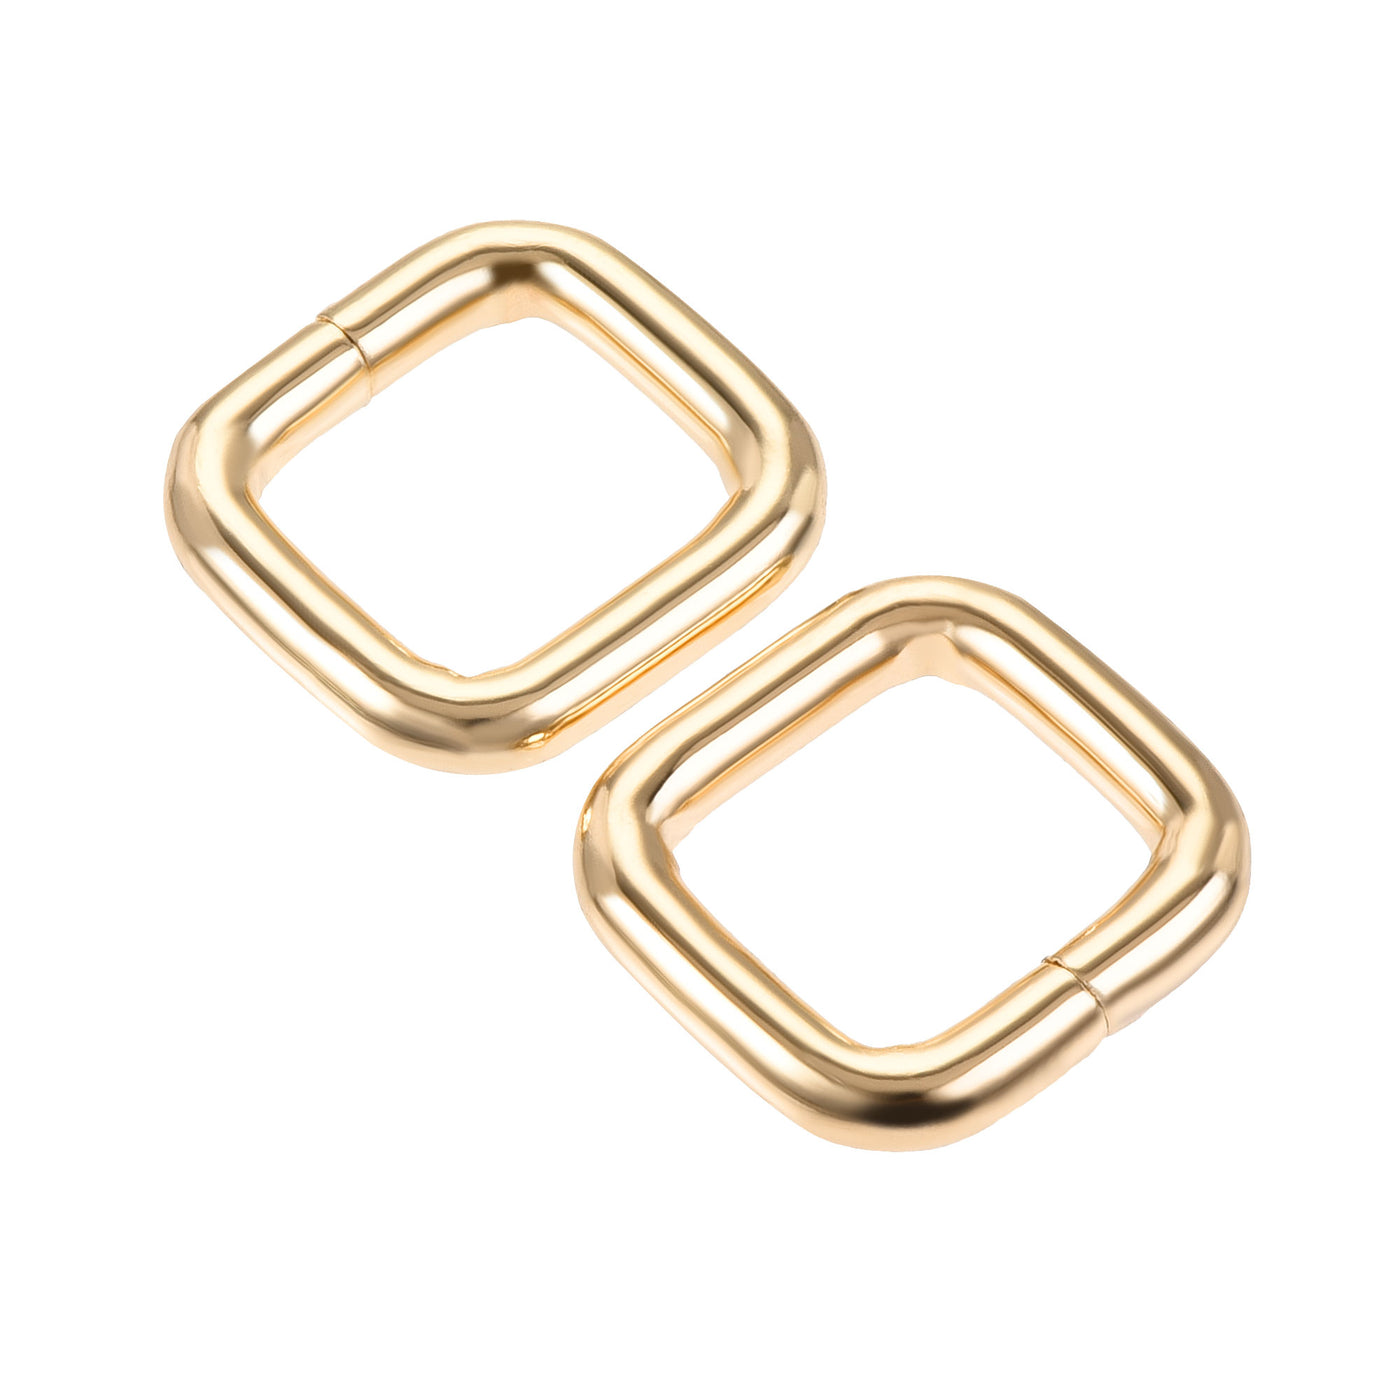 Uxcell Uxcell Metal Rectangle Ring Buckles 14x13mm for Bags Belts DIY Gold Tone 10pcs